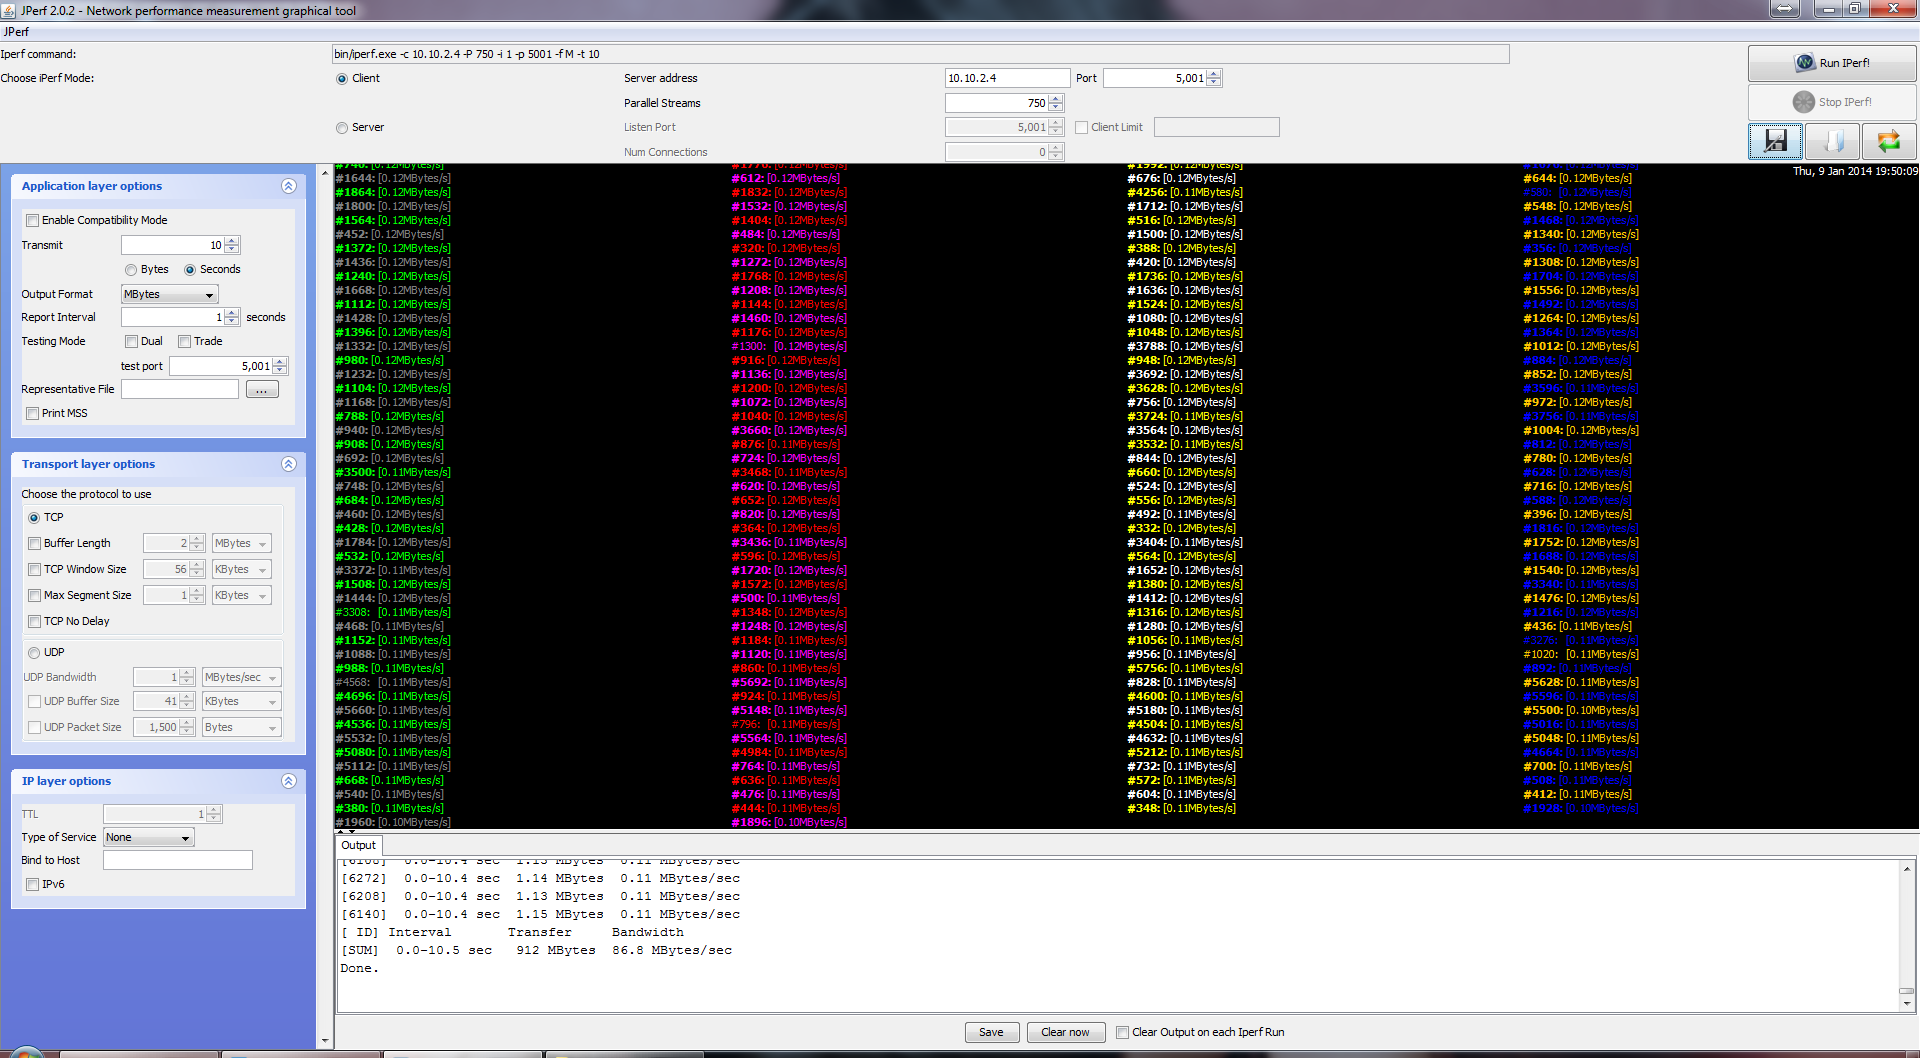 hp_ps1810-8g_switch_jperf_4